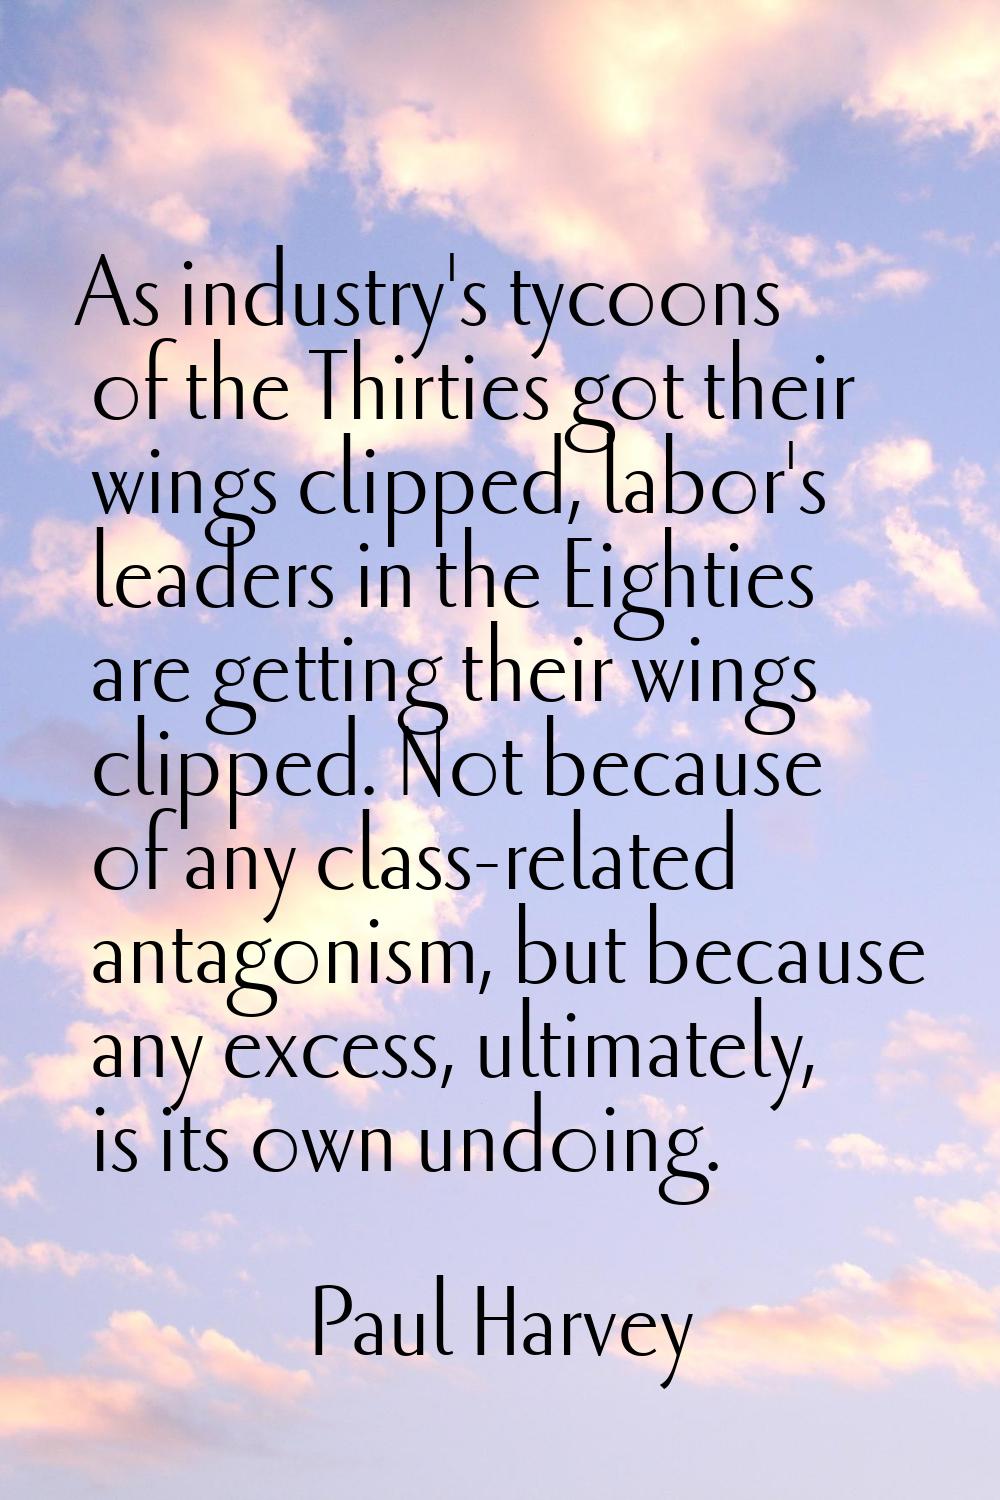 As industry's tycoons of the Thirties got their wings clipped, labor's leaders in the Eighties are 